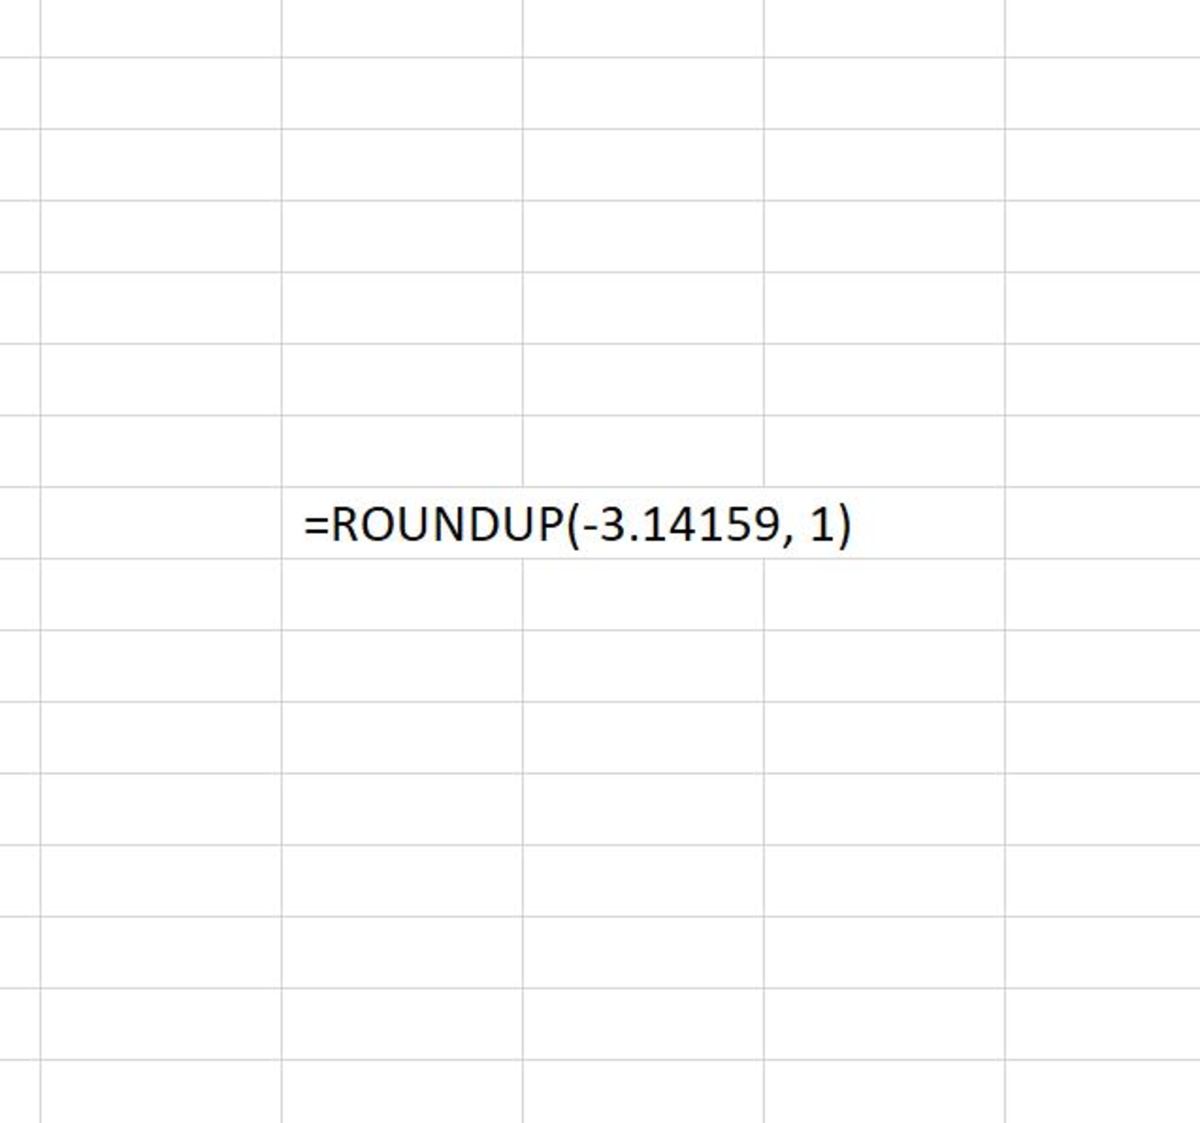 The ROUNDUP function is used to round up a number to one decimal place. 